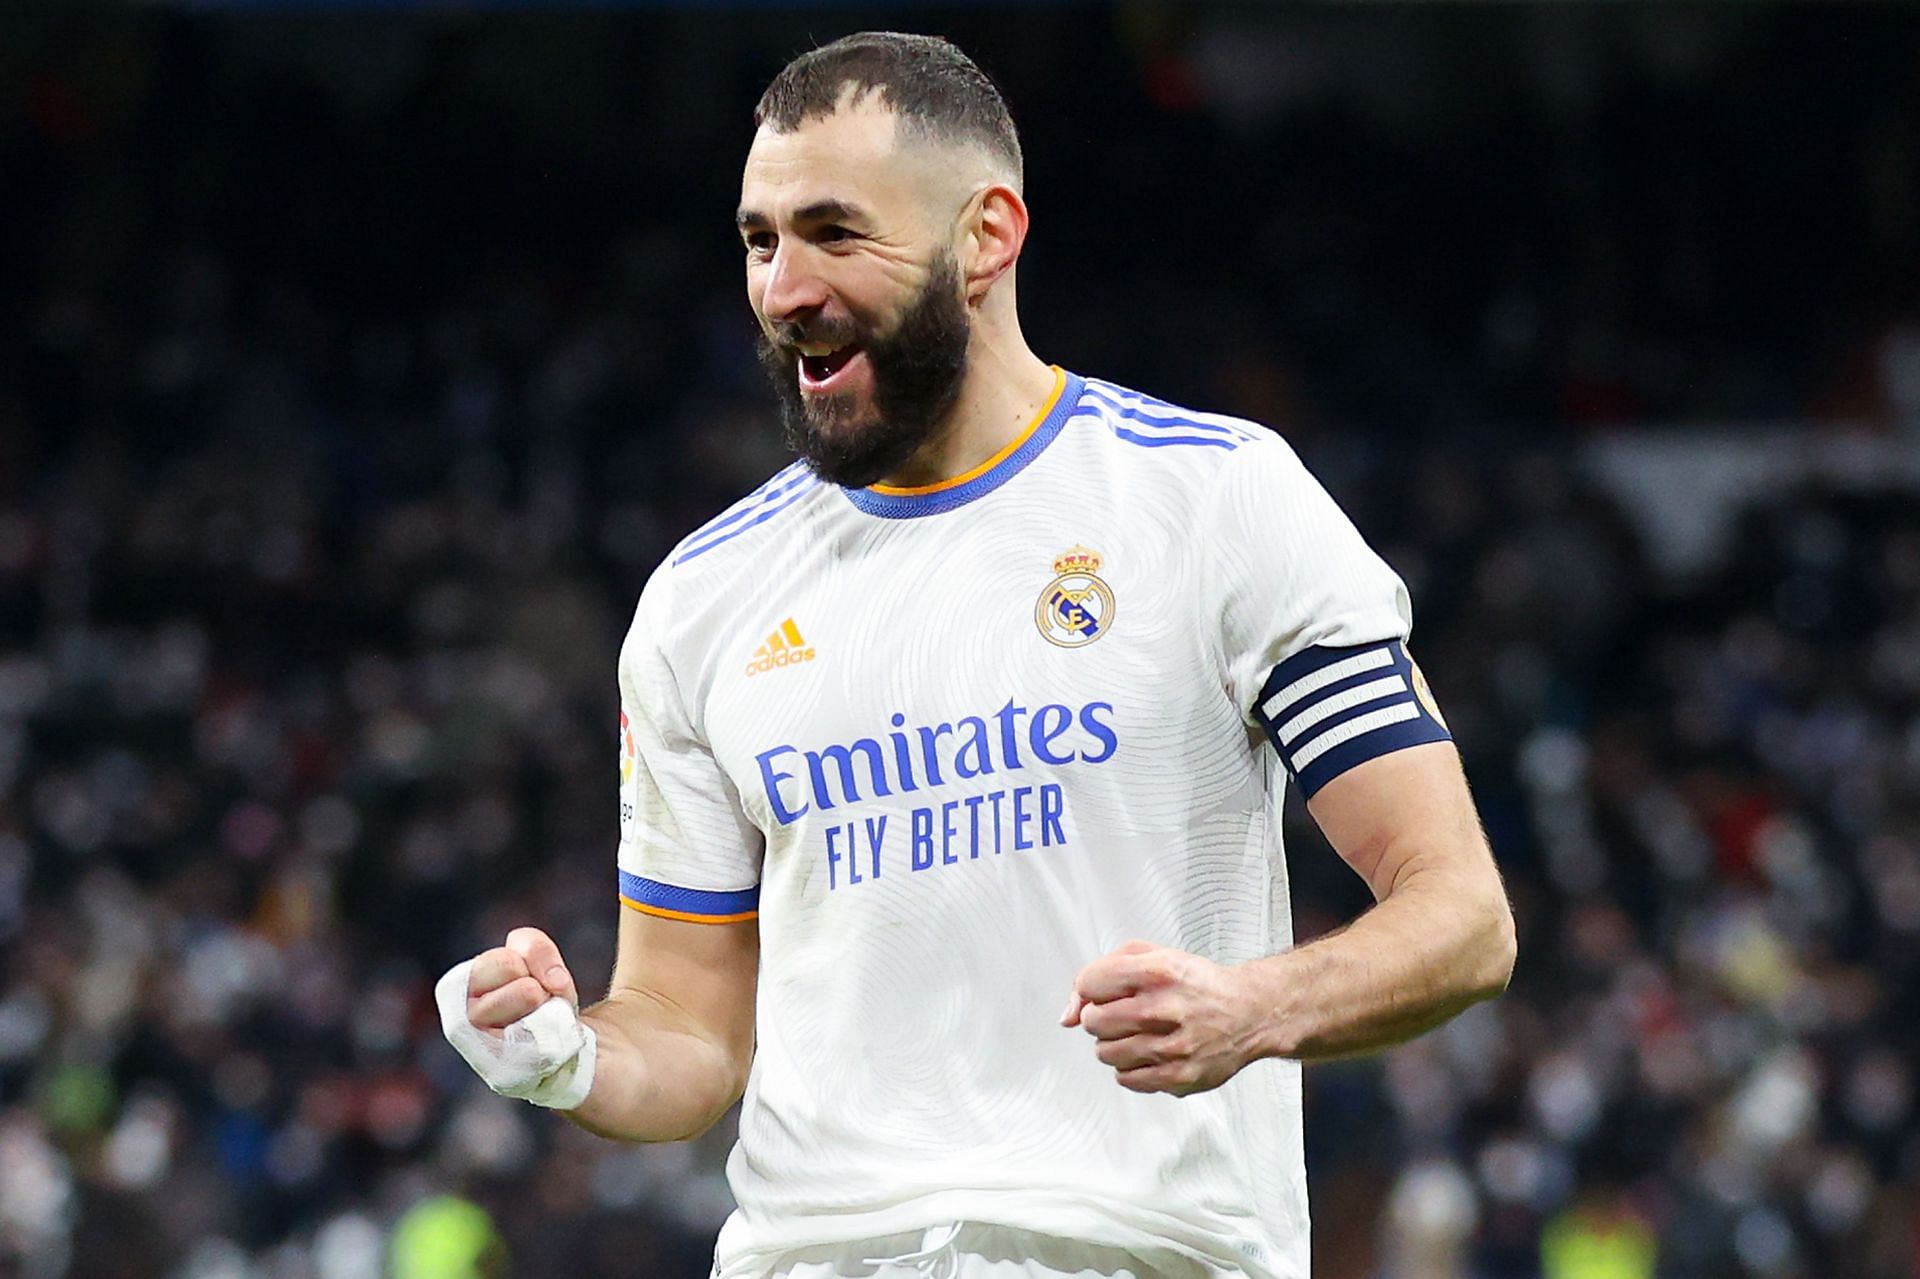 PSG will have to try and contain Karim Benzema